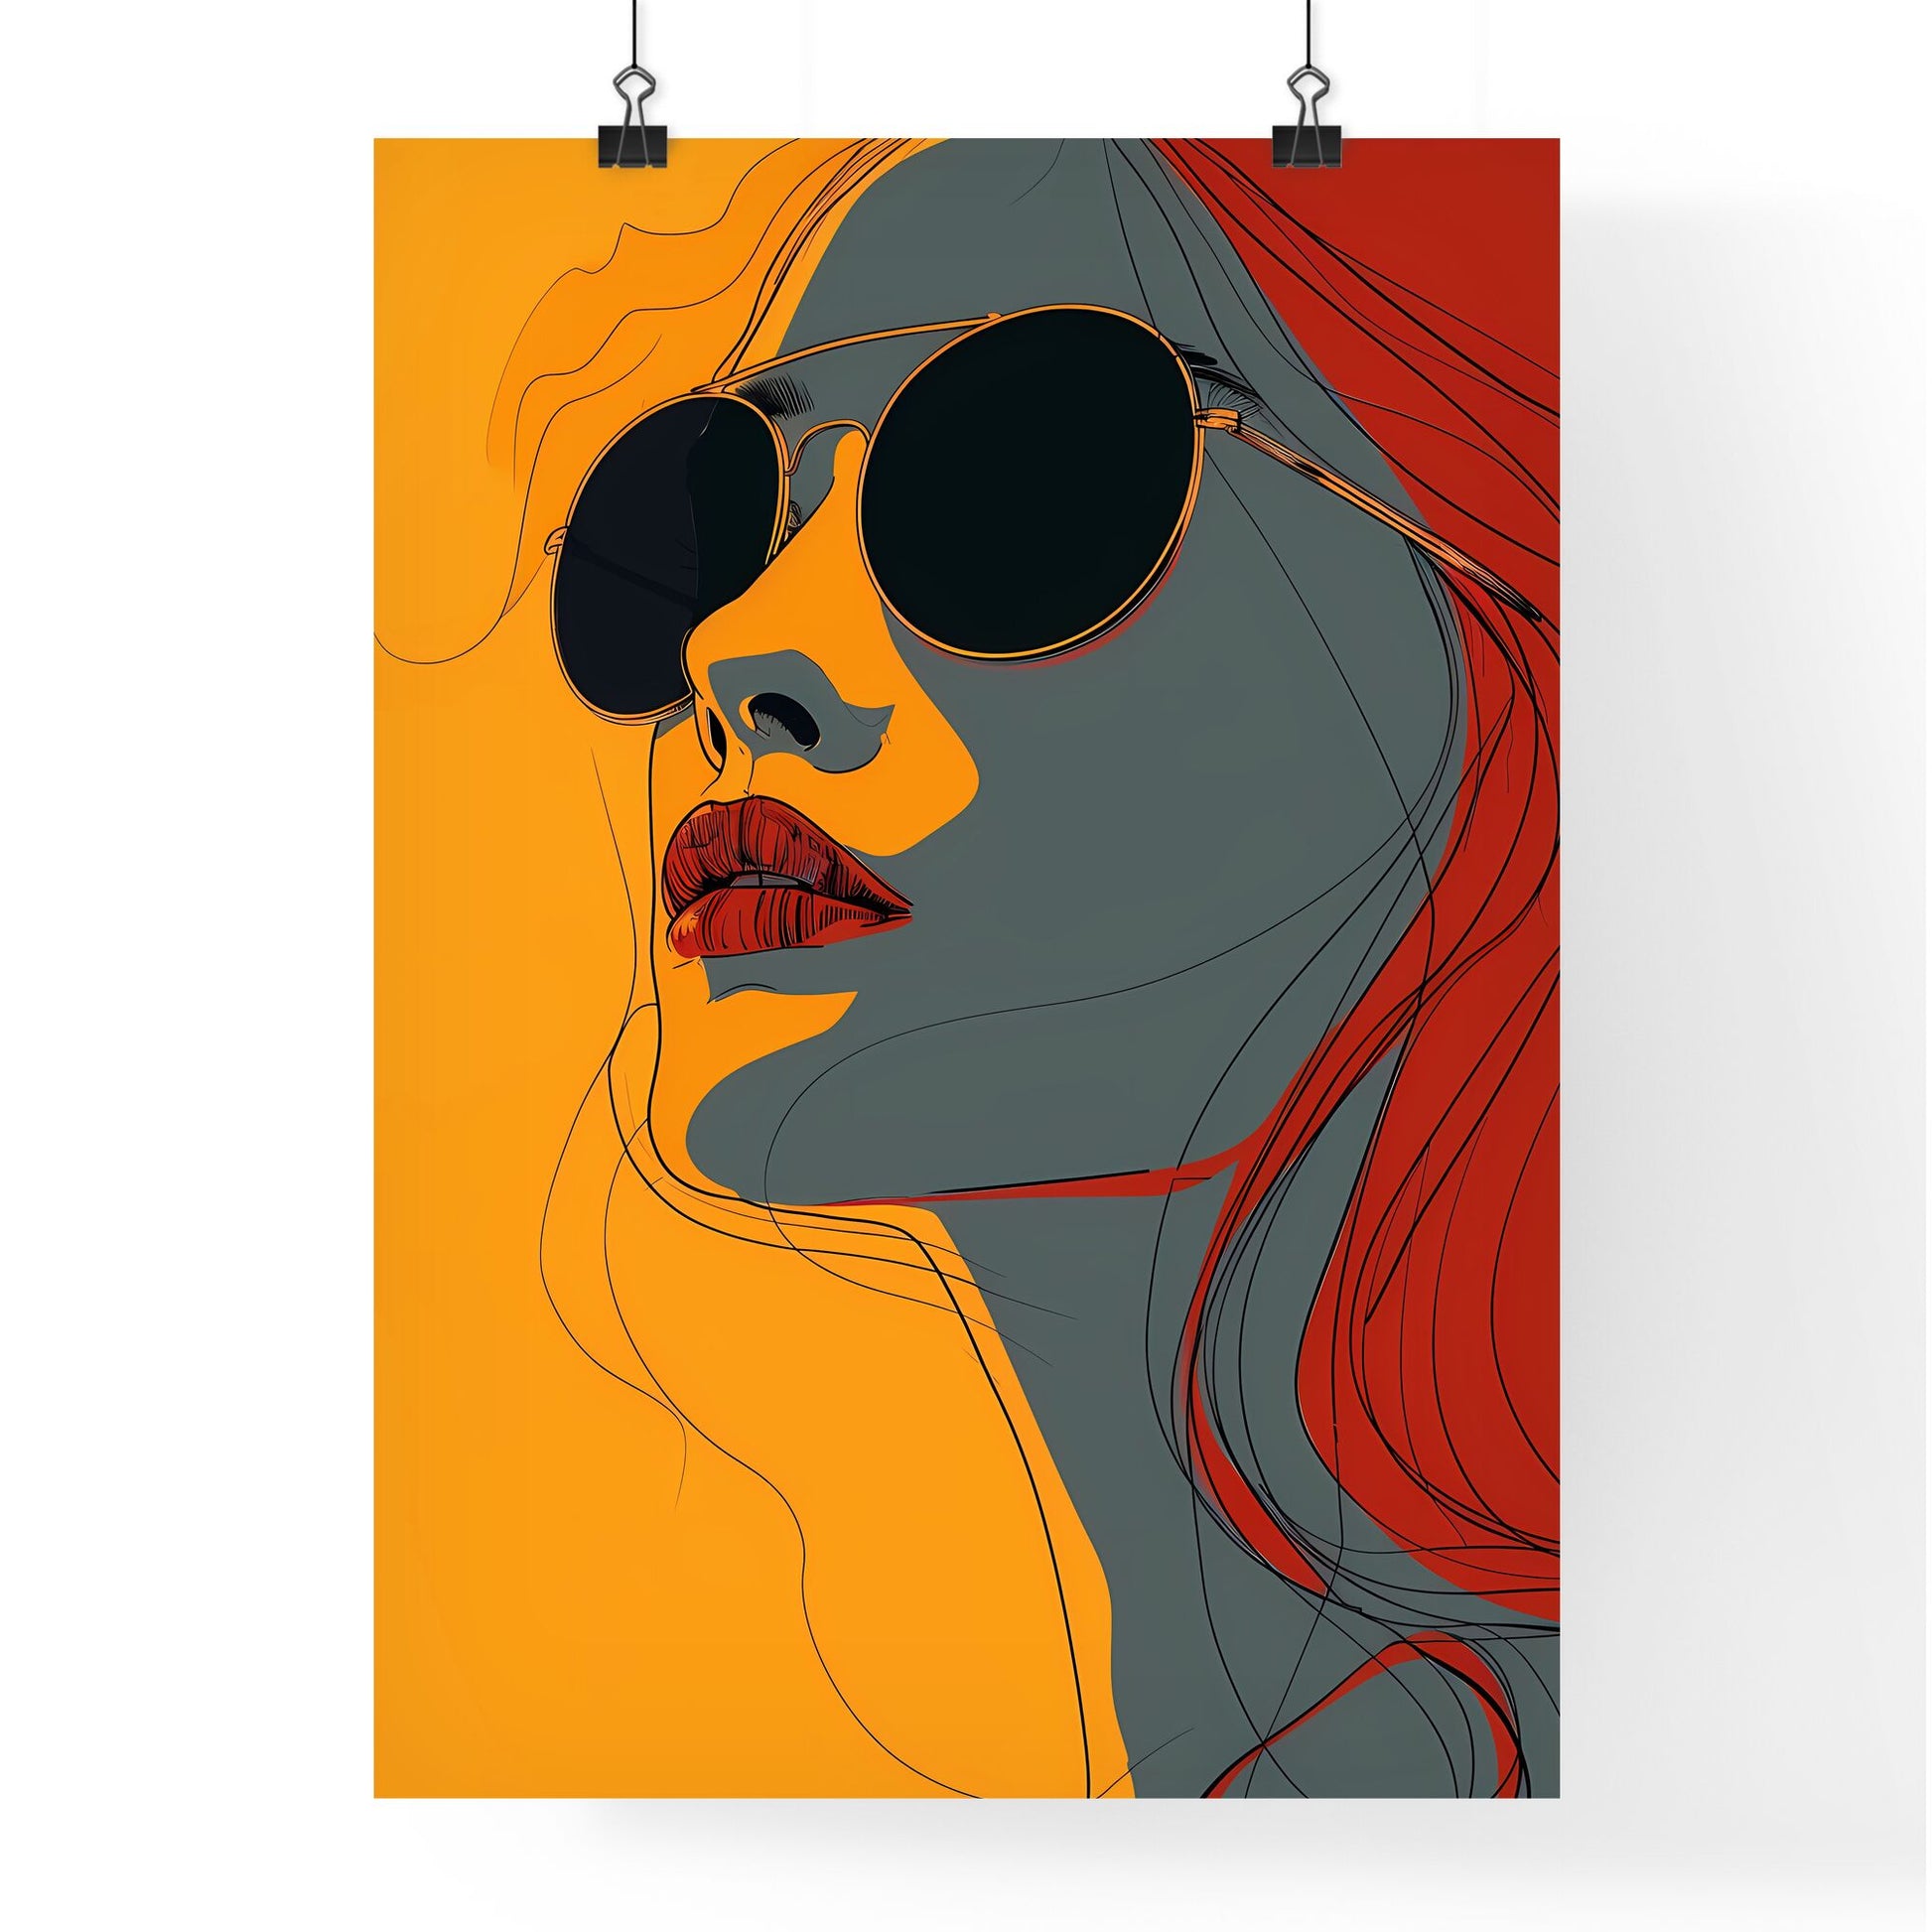 Geometric Abstract Art: Minimalistic 60s Girl Poster with Vibrant Geometric Shapes and Sunglasses Default Title